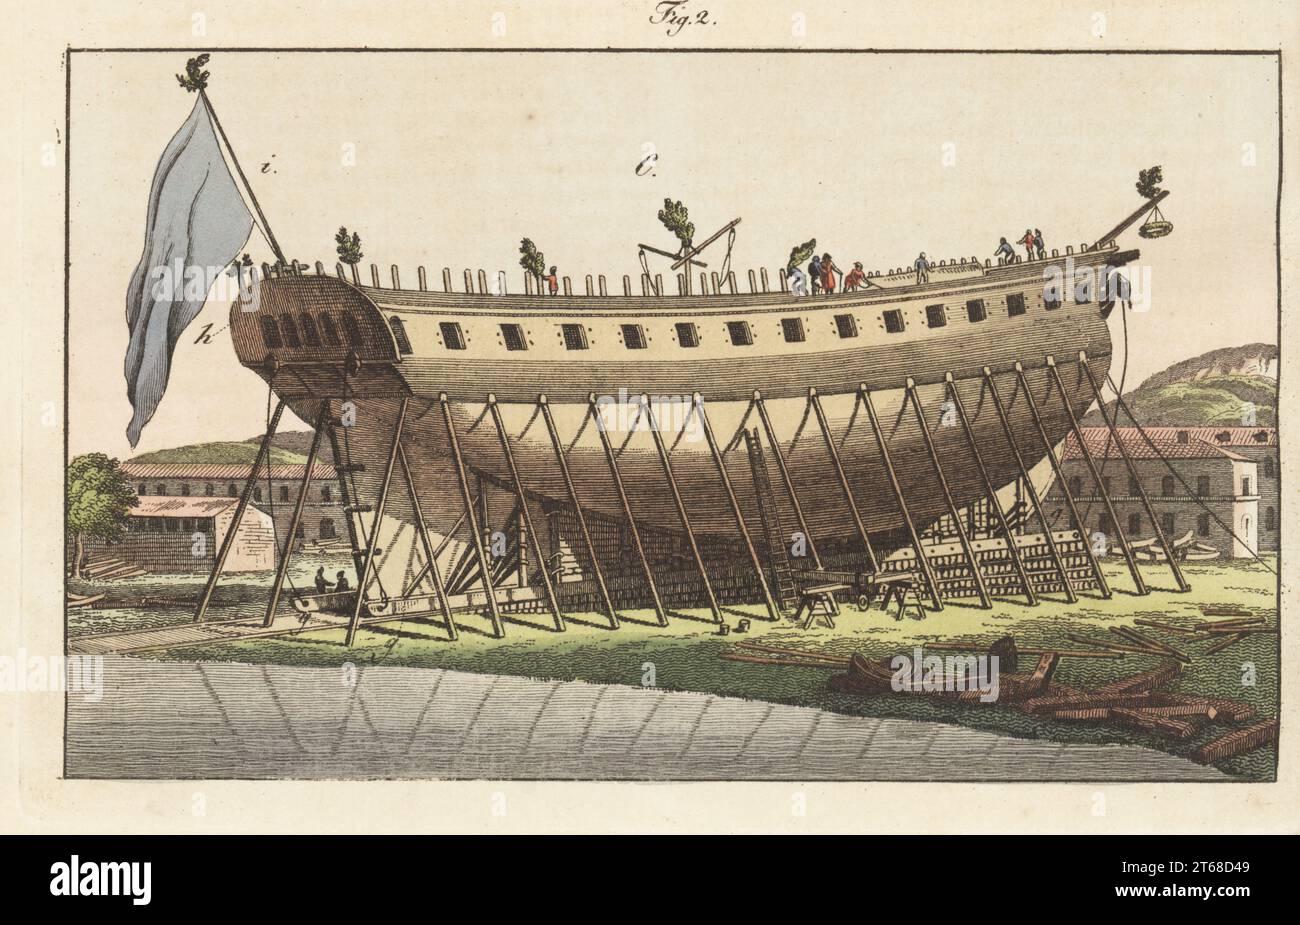 Vessel in a shipyard ready for launch, 1800s. French frigate with one row of gun ports, blue ensign, supported by scaffolding and decorated with garlands and bouquets. Vaisseau sur le chantier pret a etre lance a l'eau. Handcoloured copperplate engraving from Carl Bertuch's Bilderbuch fur Kinder (Picture Book for Children), Weimar, 1815. A 12-volume encyclopedia for children illustrated with almost 1,200 engraved plates on natural history, science, costume, mythology, etc., published from 1790-1830. Stock Photo